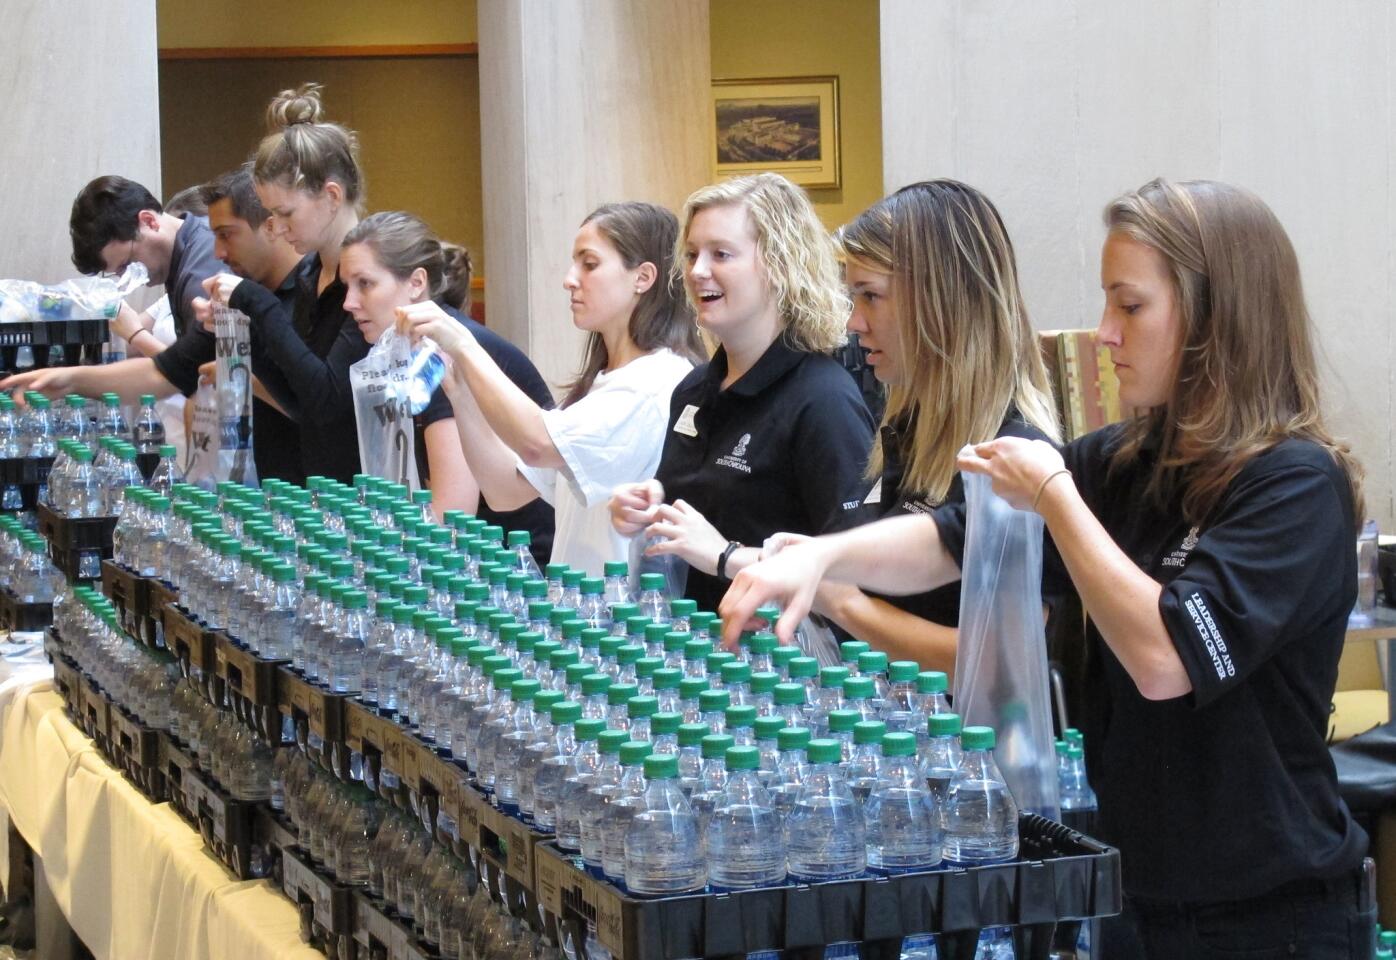 Workers and volunteers at the University of South Carolina bag bottled water for distribution to students on campus in Columbia, S.C., where flooding has made tap water unsuitable to drink without boiling.